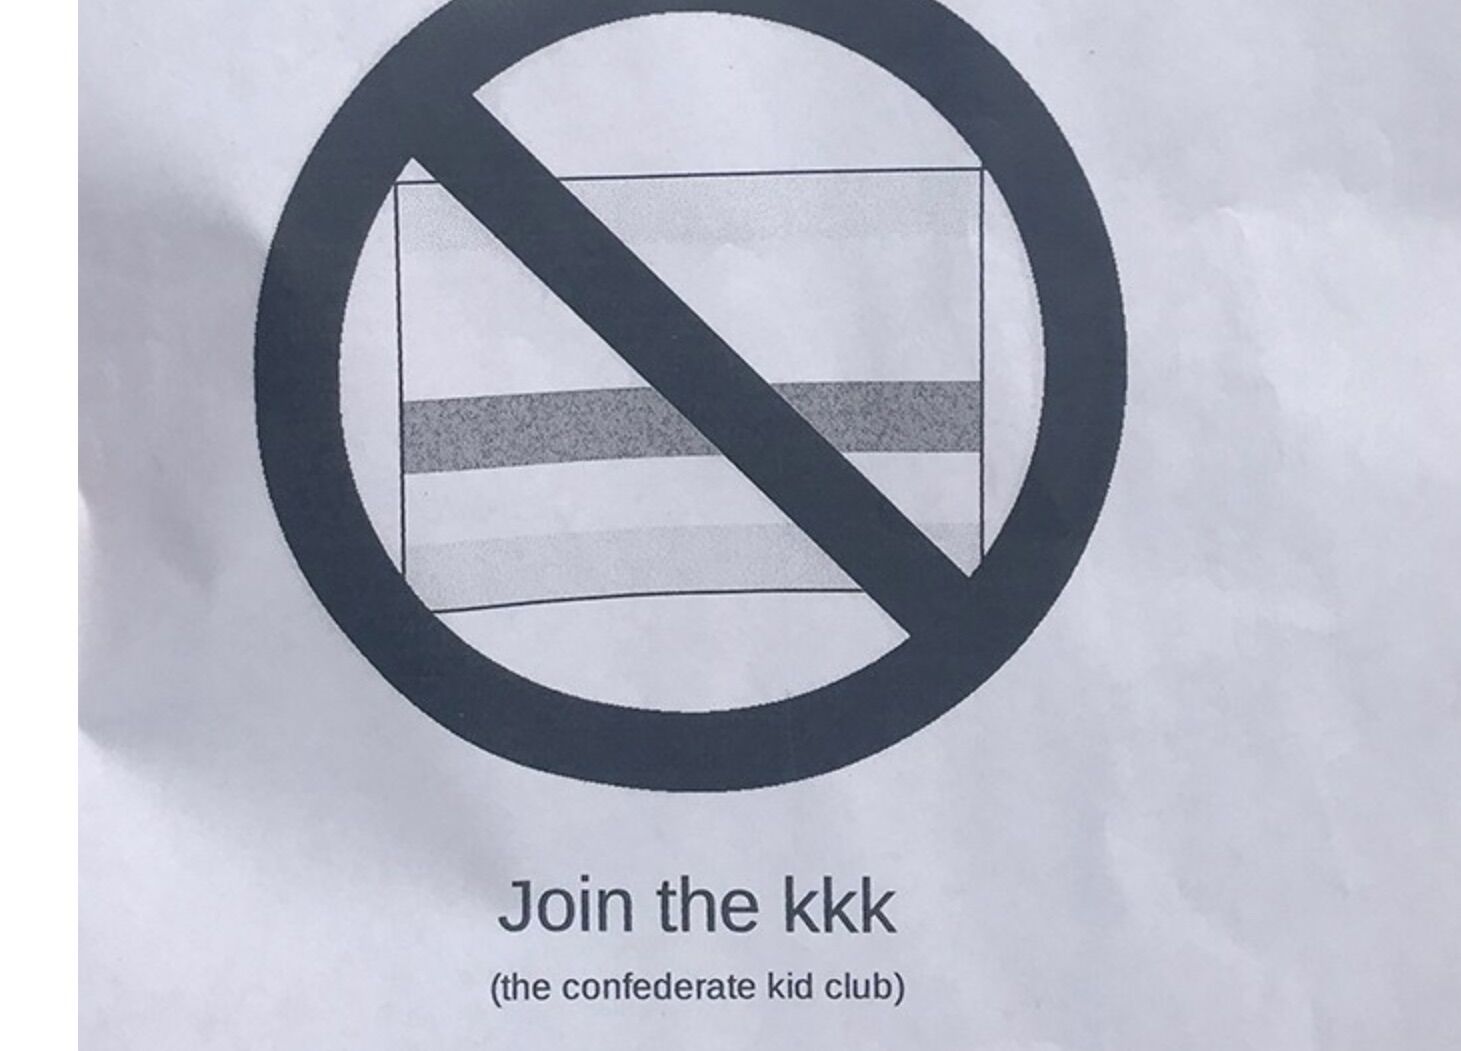 Closeup from a flier distributed at McCormick Junior High School by students wearing Confederate flag t-shirts